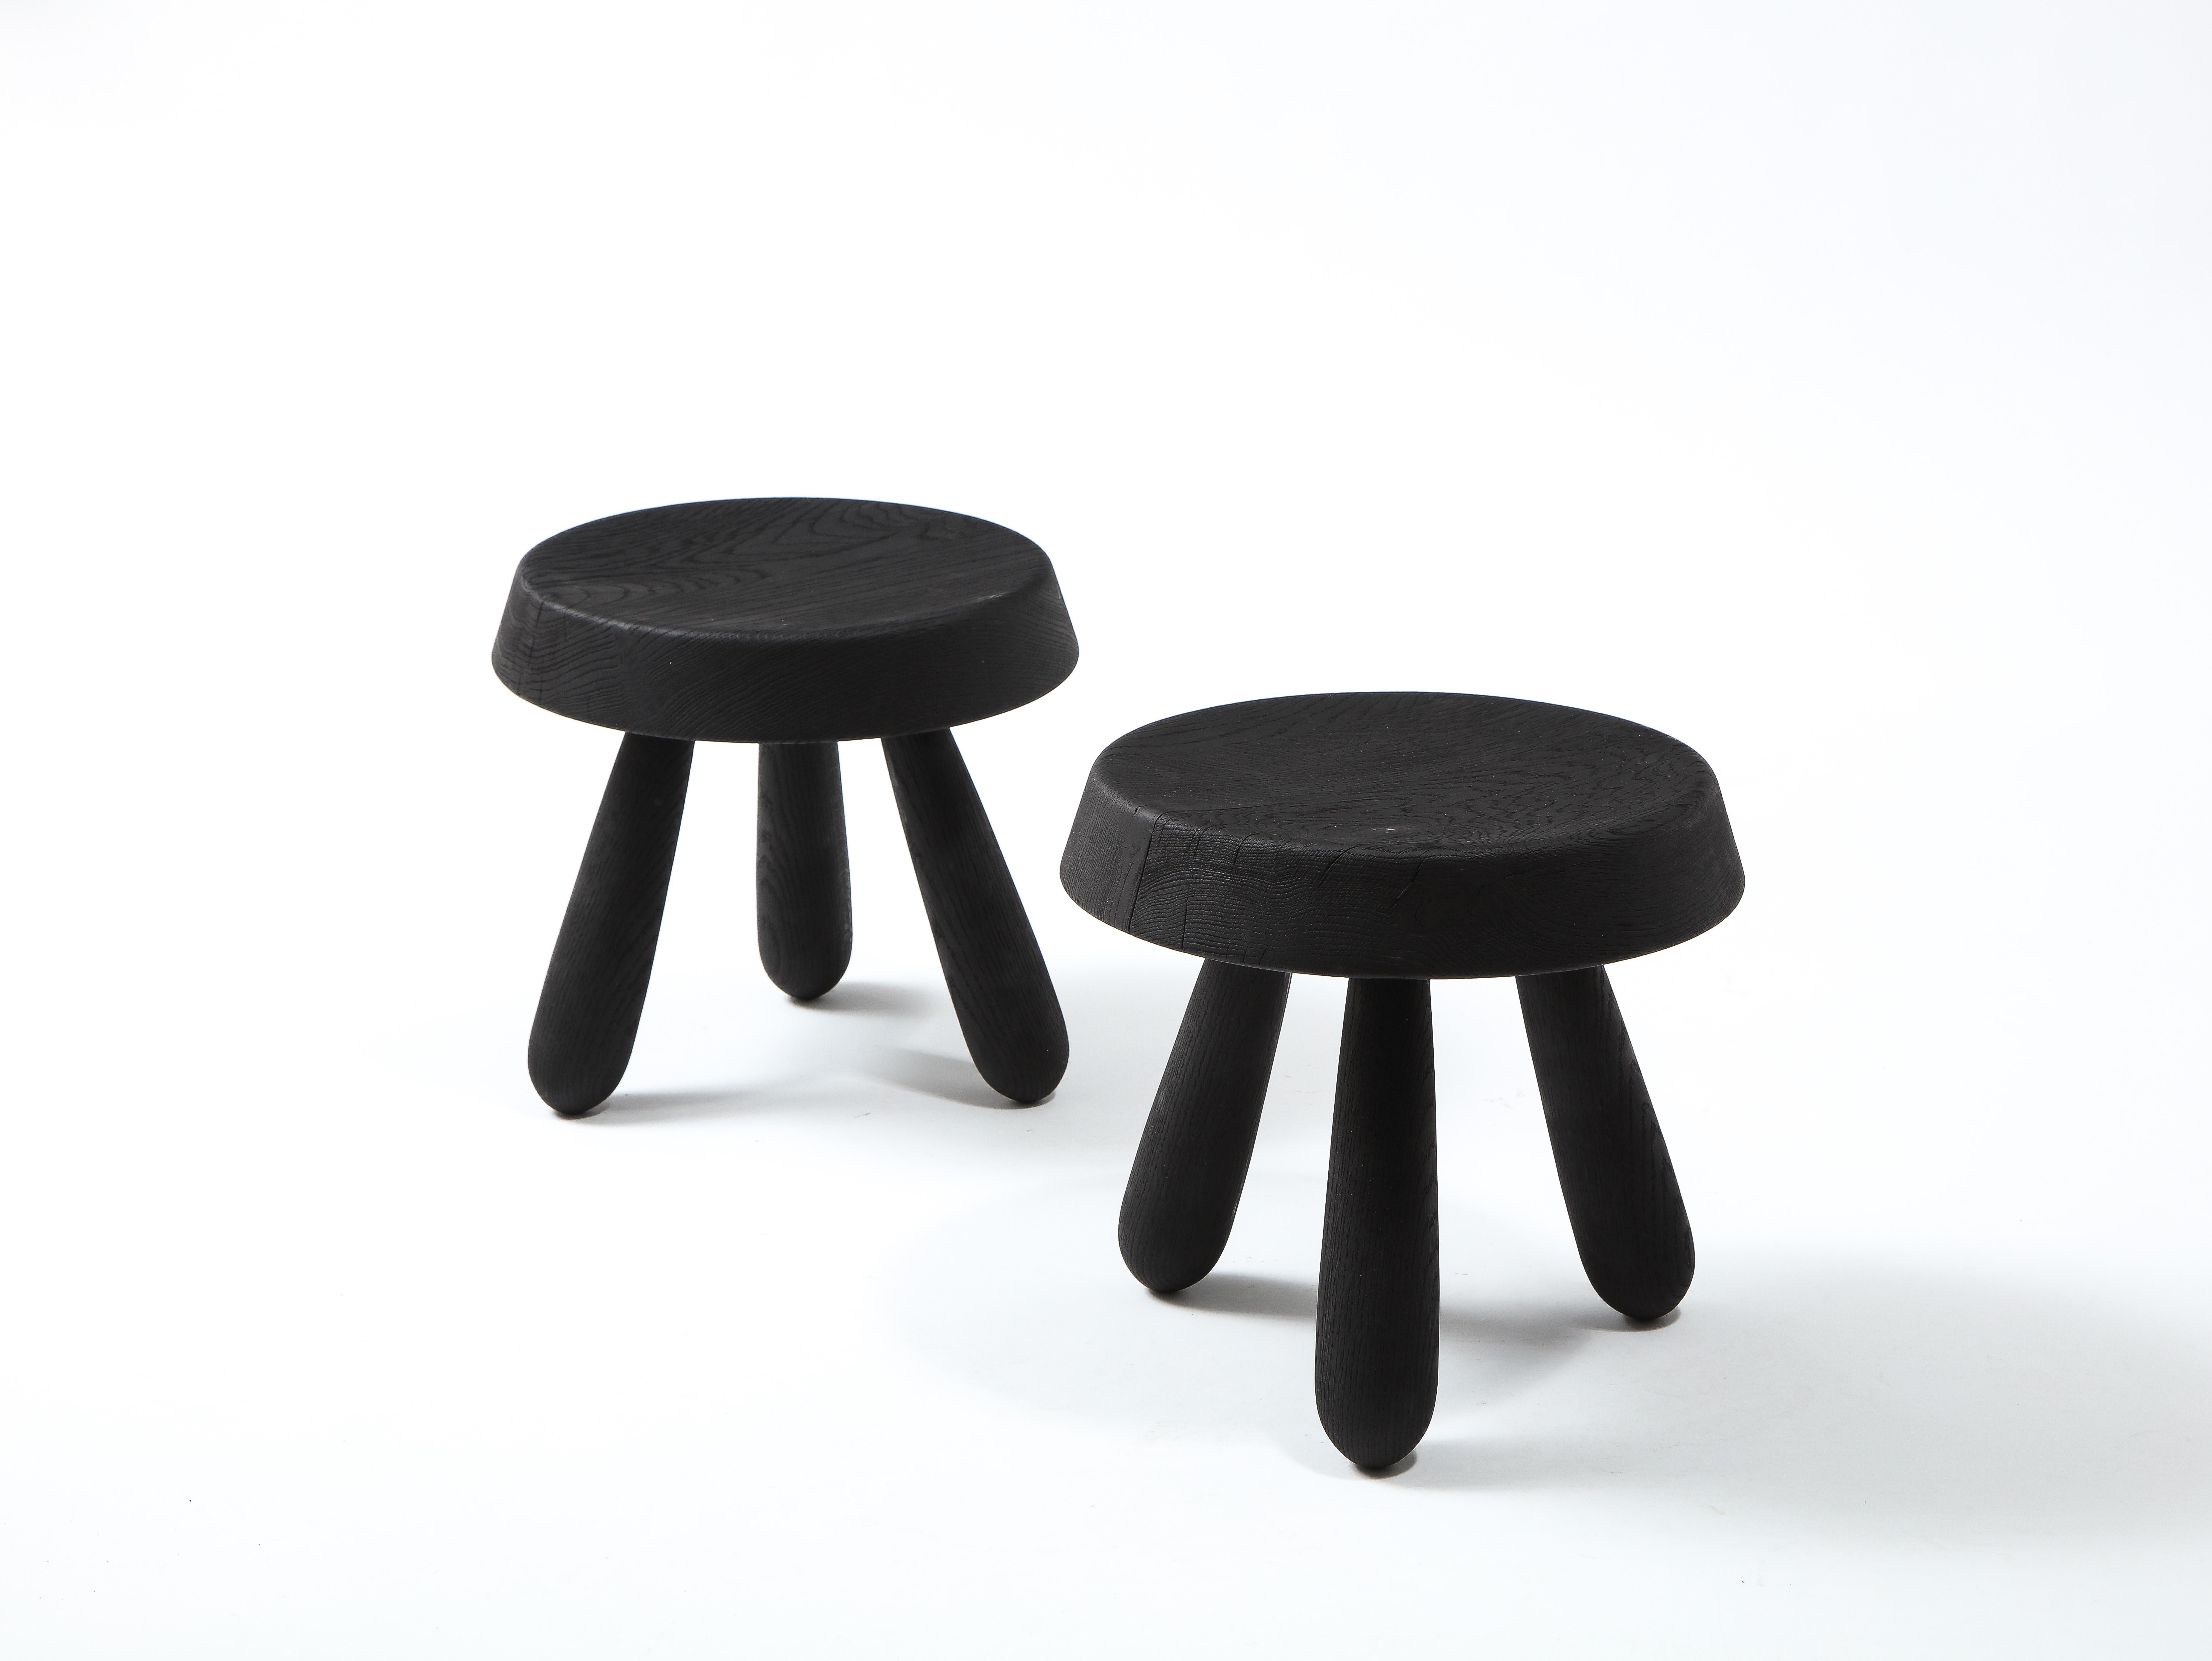 Petite Pair of Burnt Oak Tripod Stools by Douglas Mont for Facto Atelier Paris In New Condition For Sale In Chicago, IL